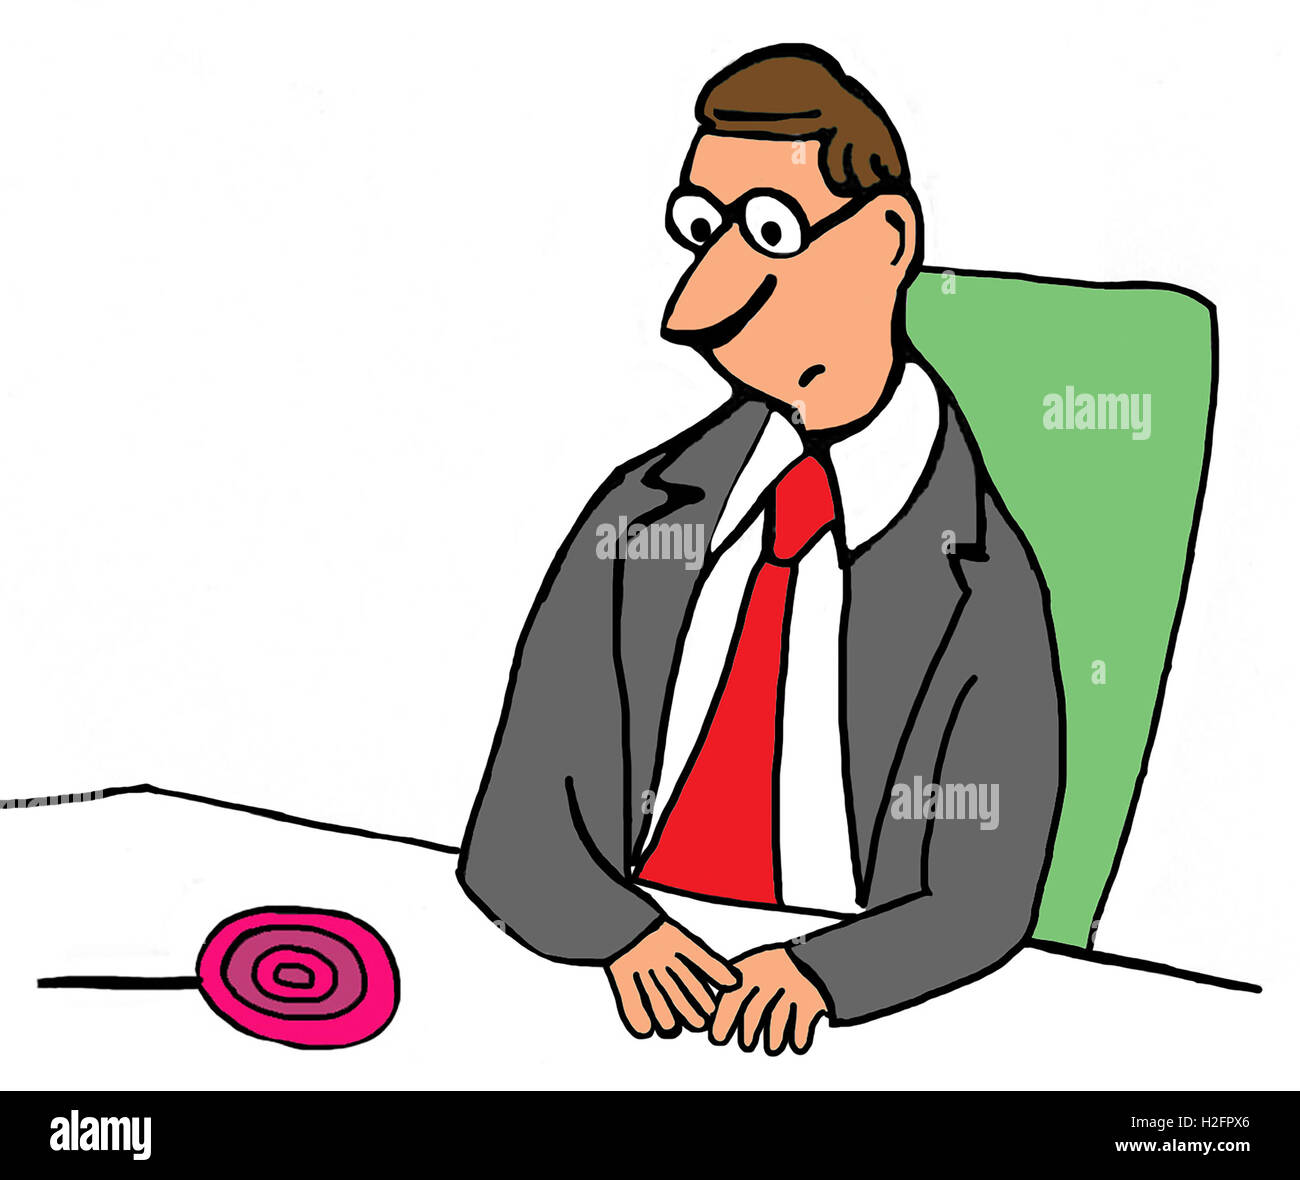 Business color illustration of a businessman sitting in a chair and looking at a lollipop on the table in front of him. Stock Photo